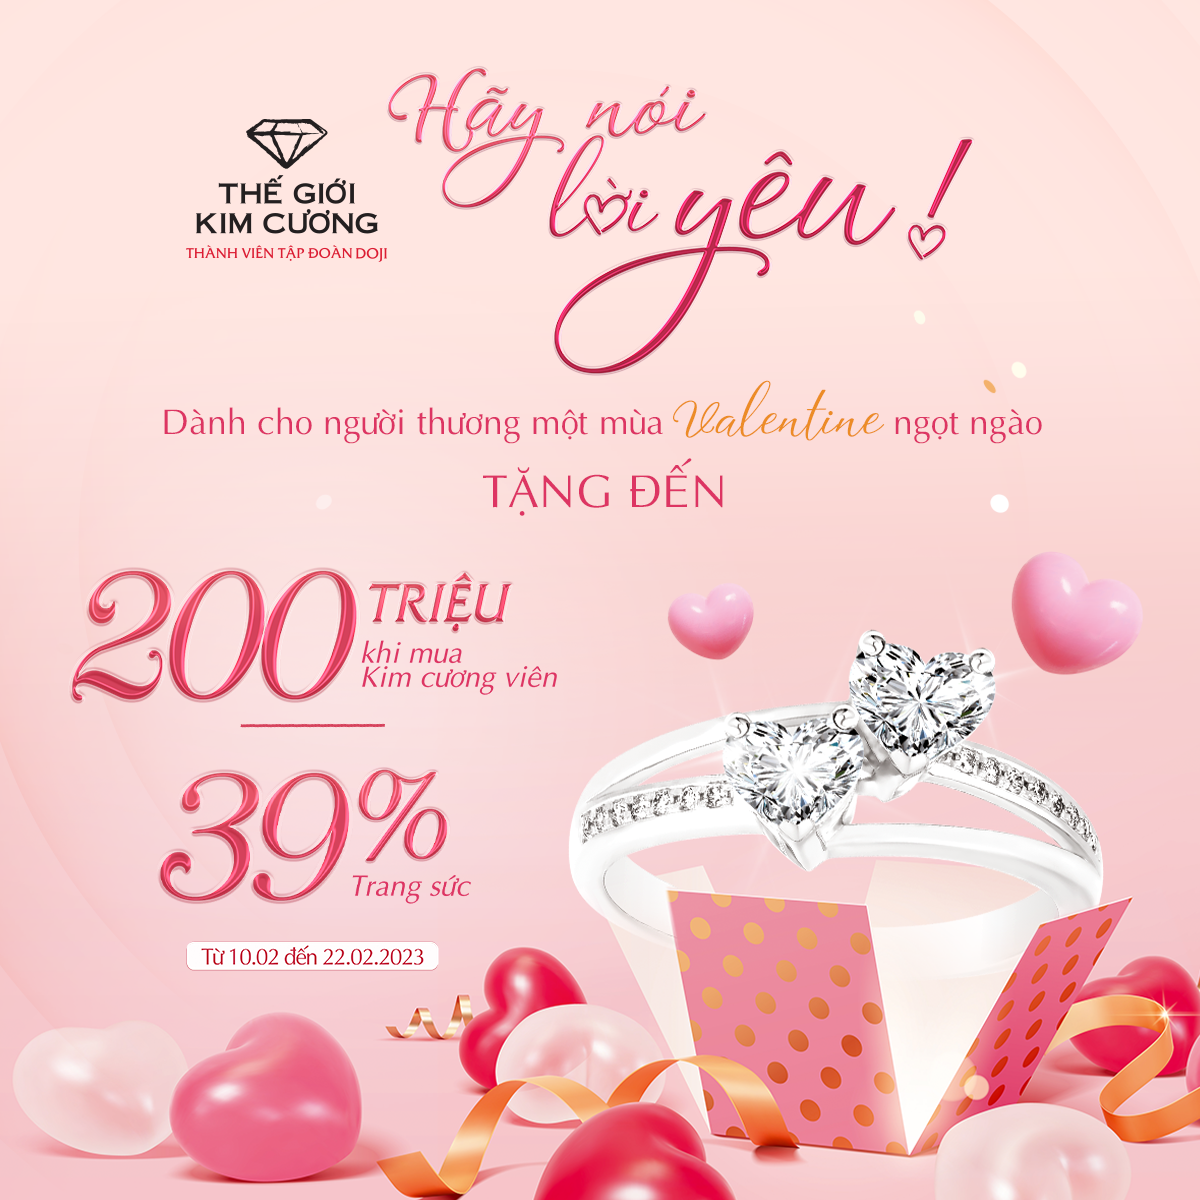 💍HAPPY VALENTINE'S DAY - JEWELRY SALE UP TO 39% AND DIAMOND SALE UP TO 200 MILLION VND💍